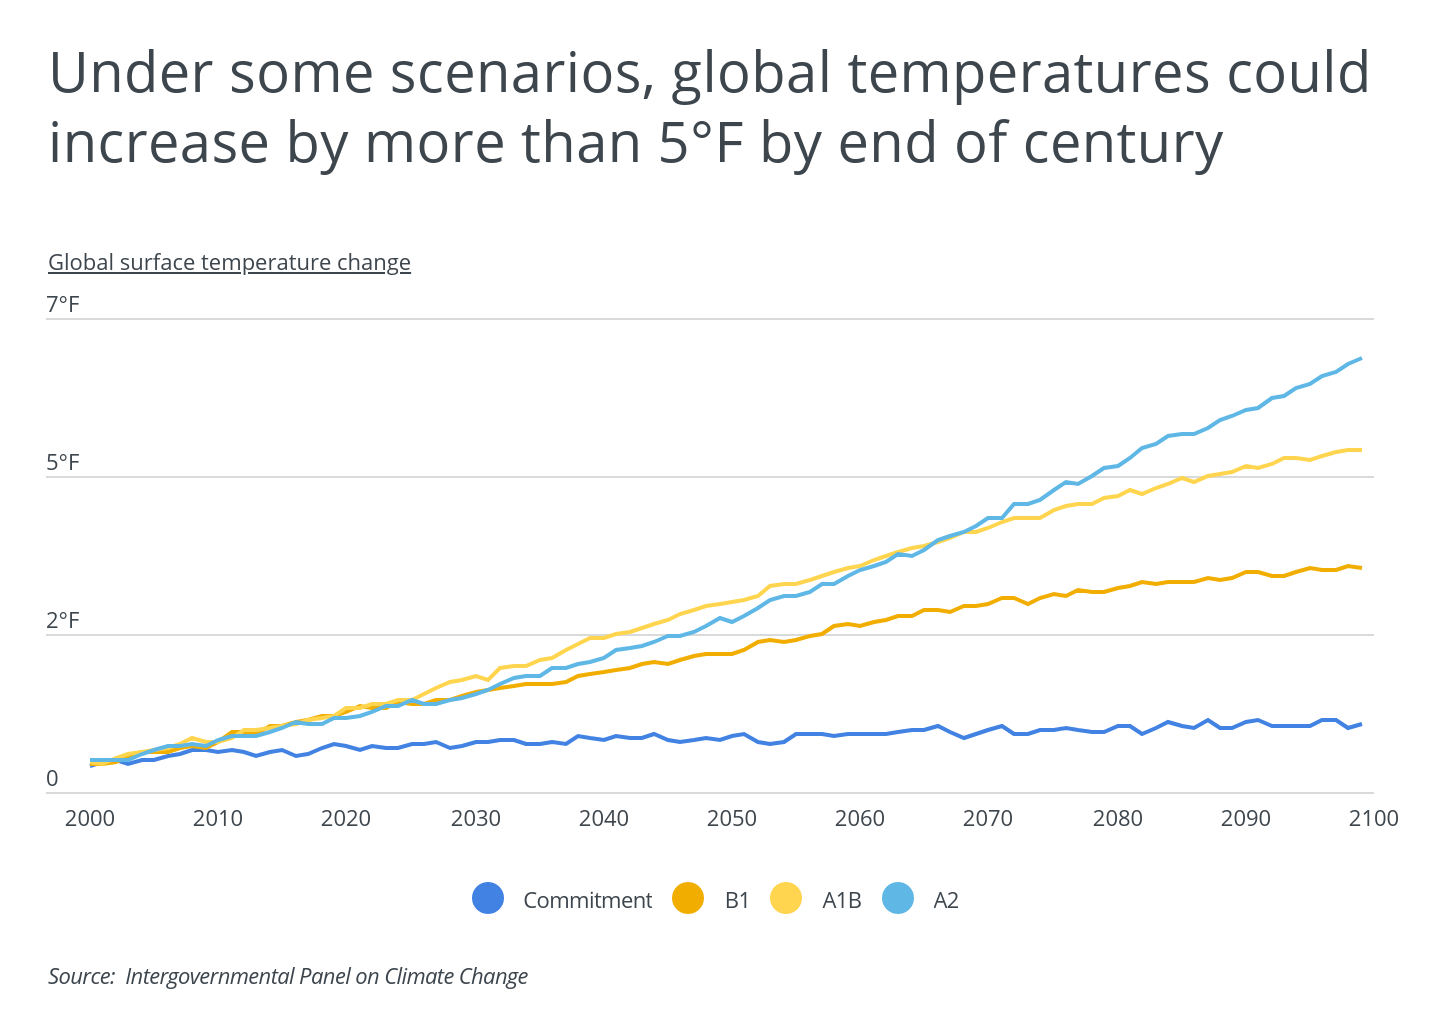 Under some scenarios, global temperatures could increase by more than 5 degrees by end of century